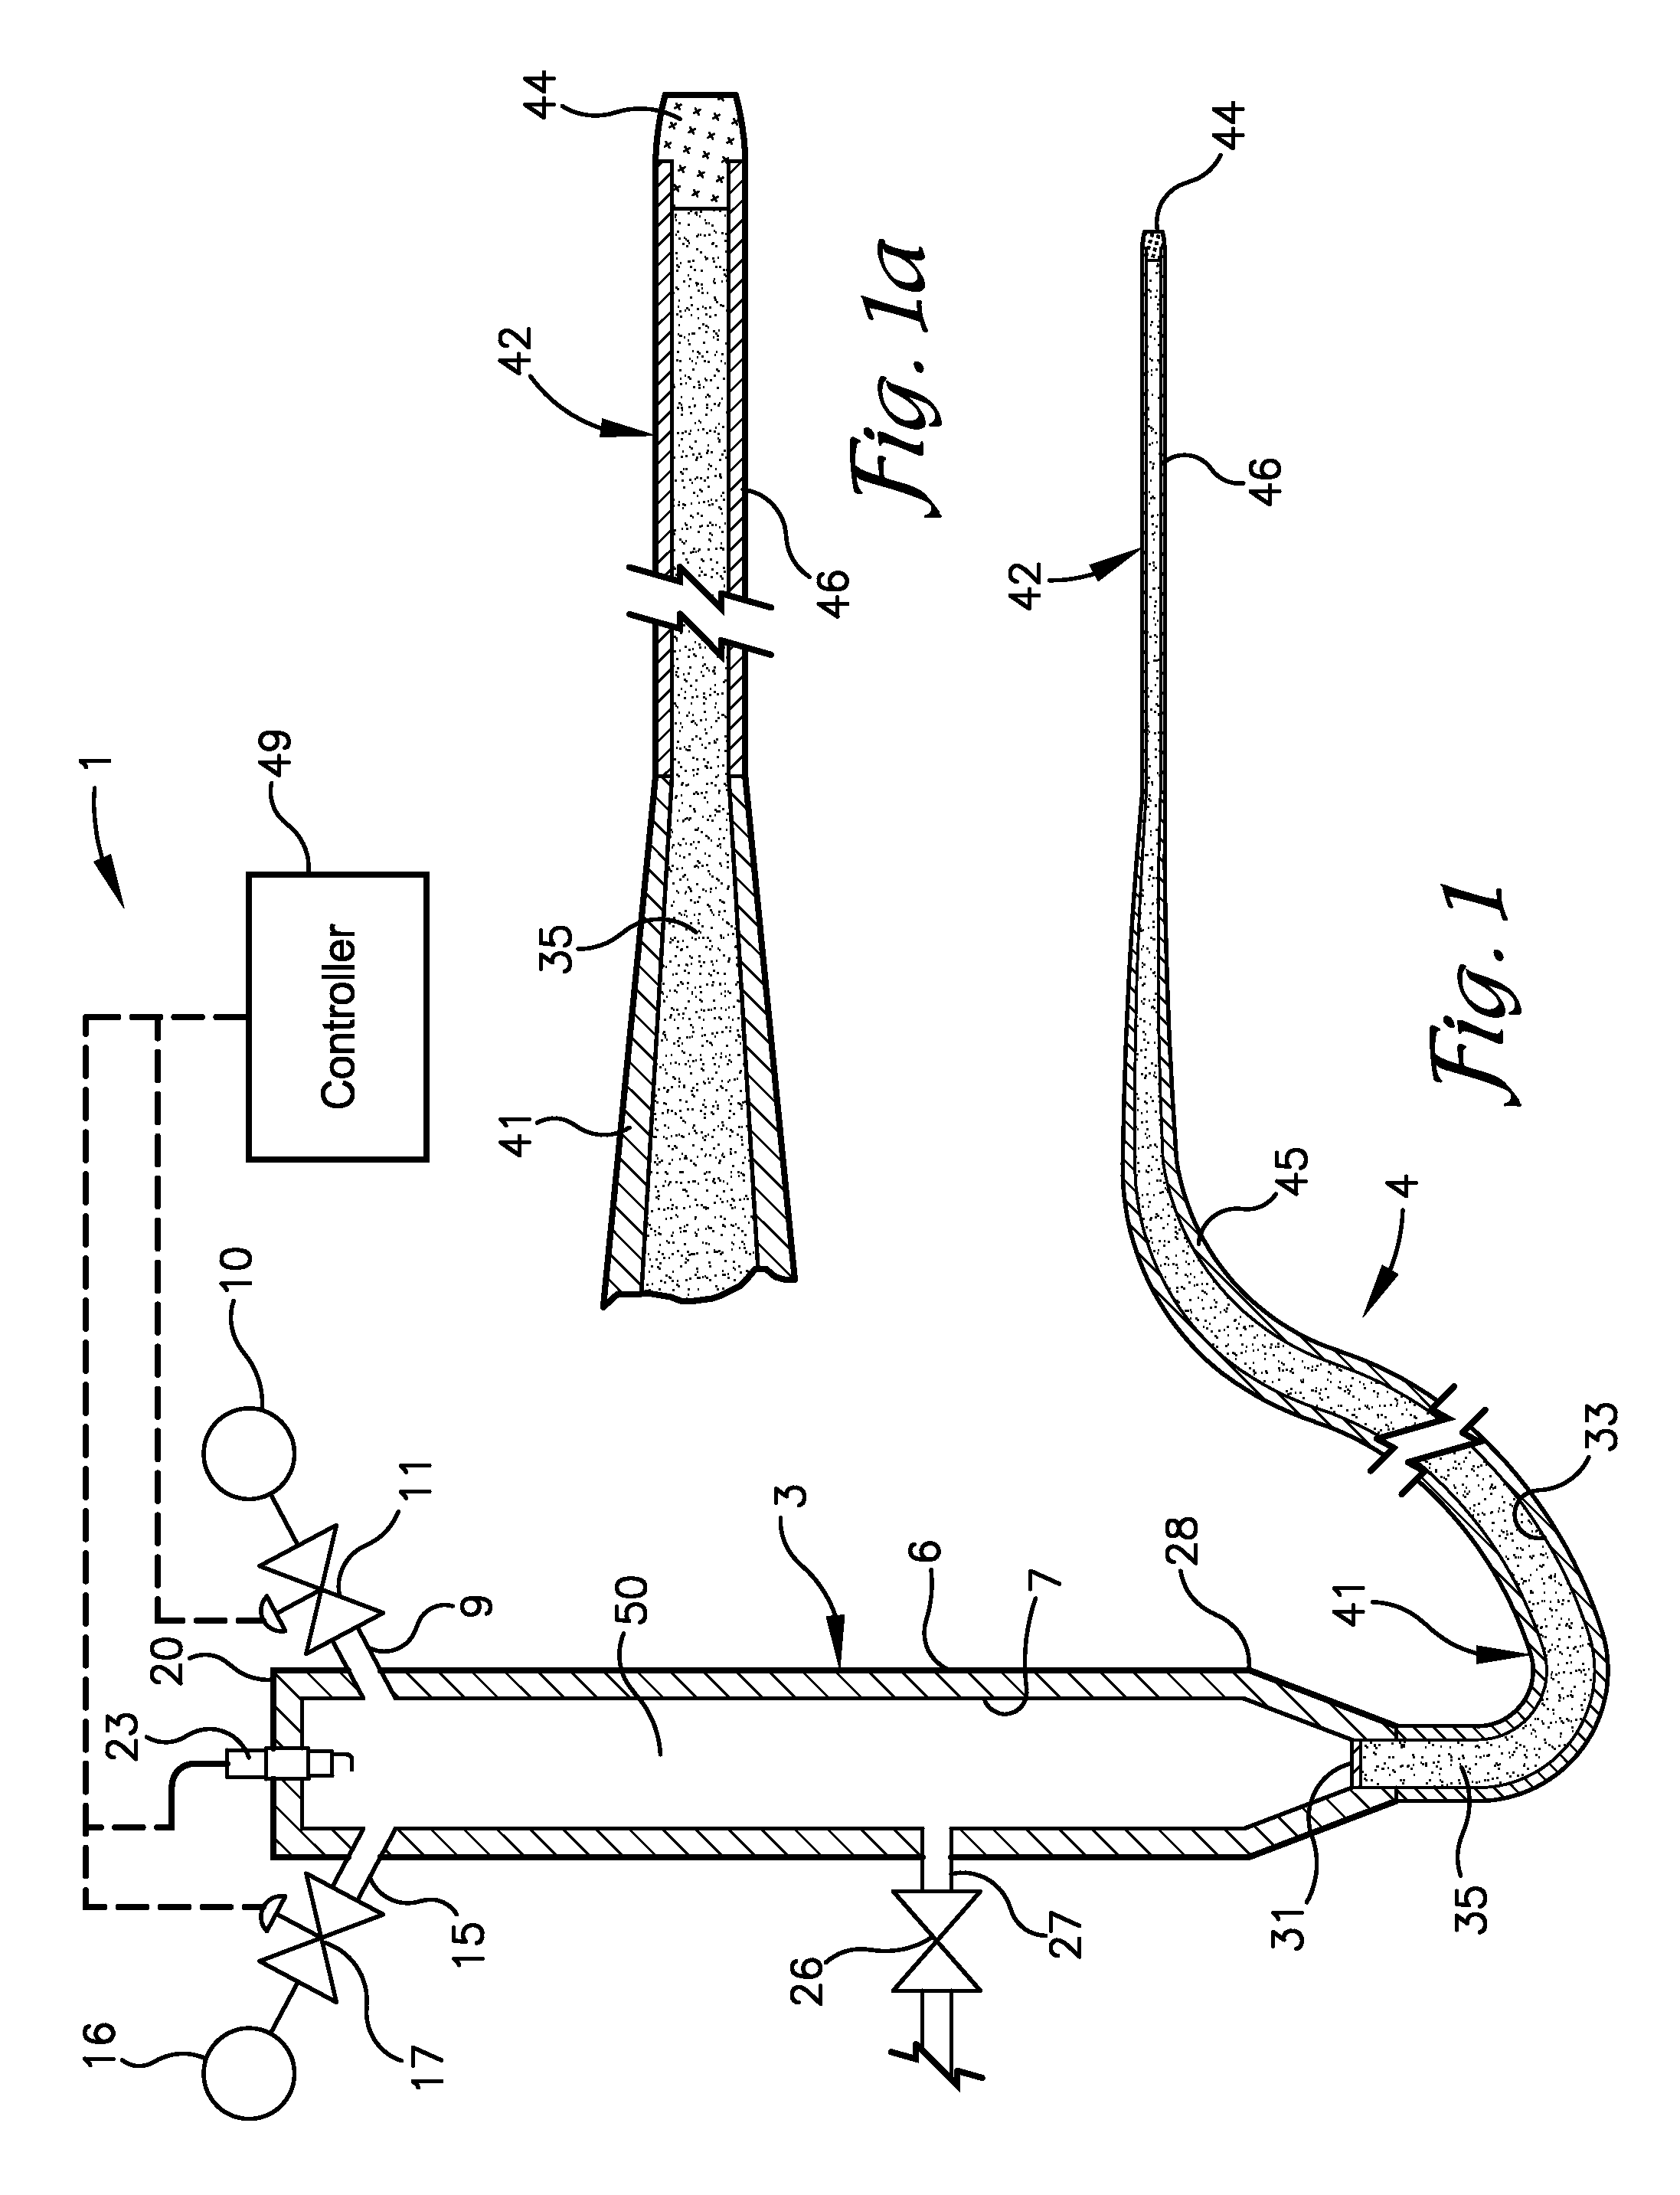 Stereotactic shockwave surgery and drug delivery apparatus